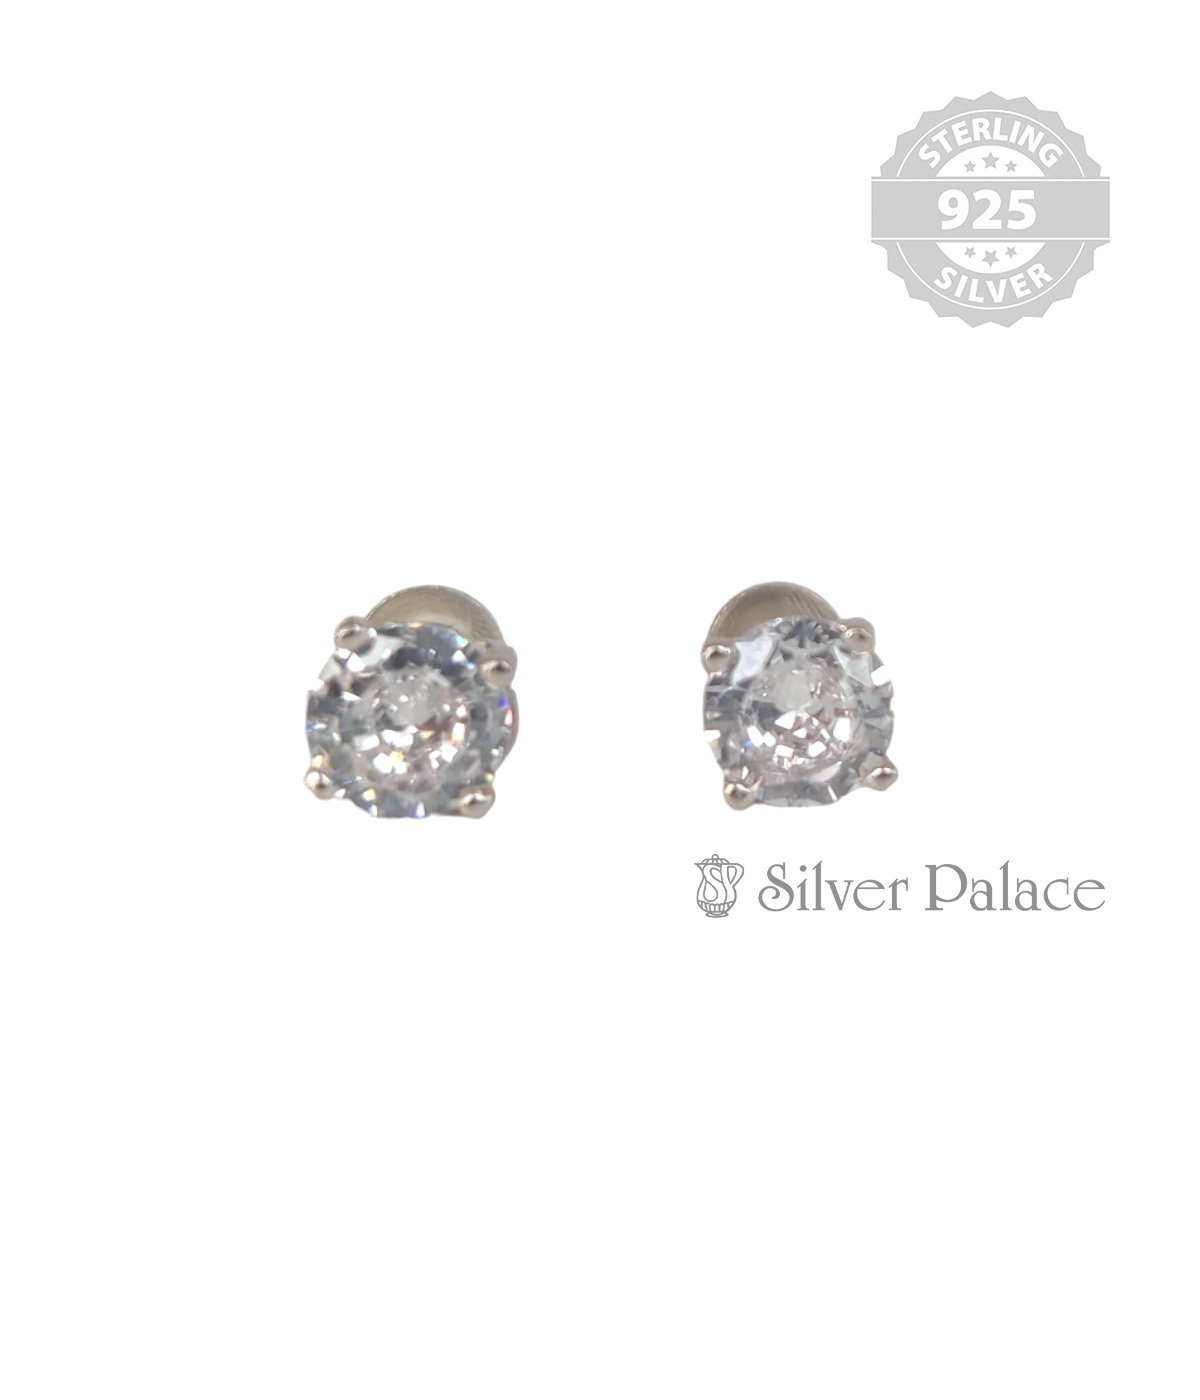 92.5 STERLING SILVER ROUND SHAPE CUBIC ZIRCONIA STUD